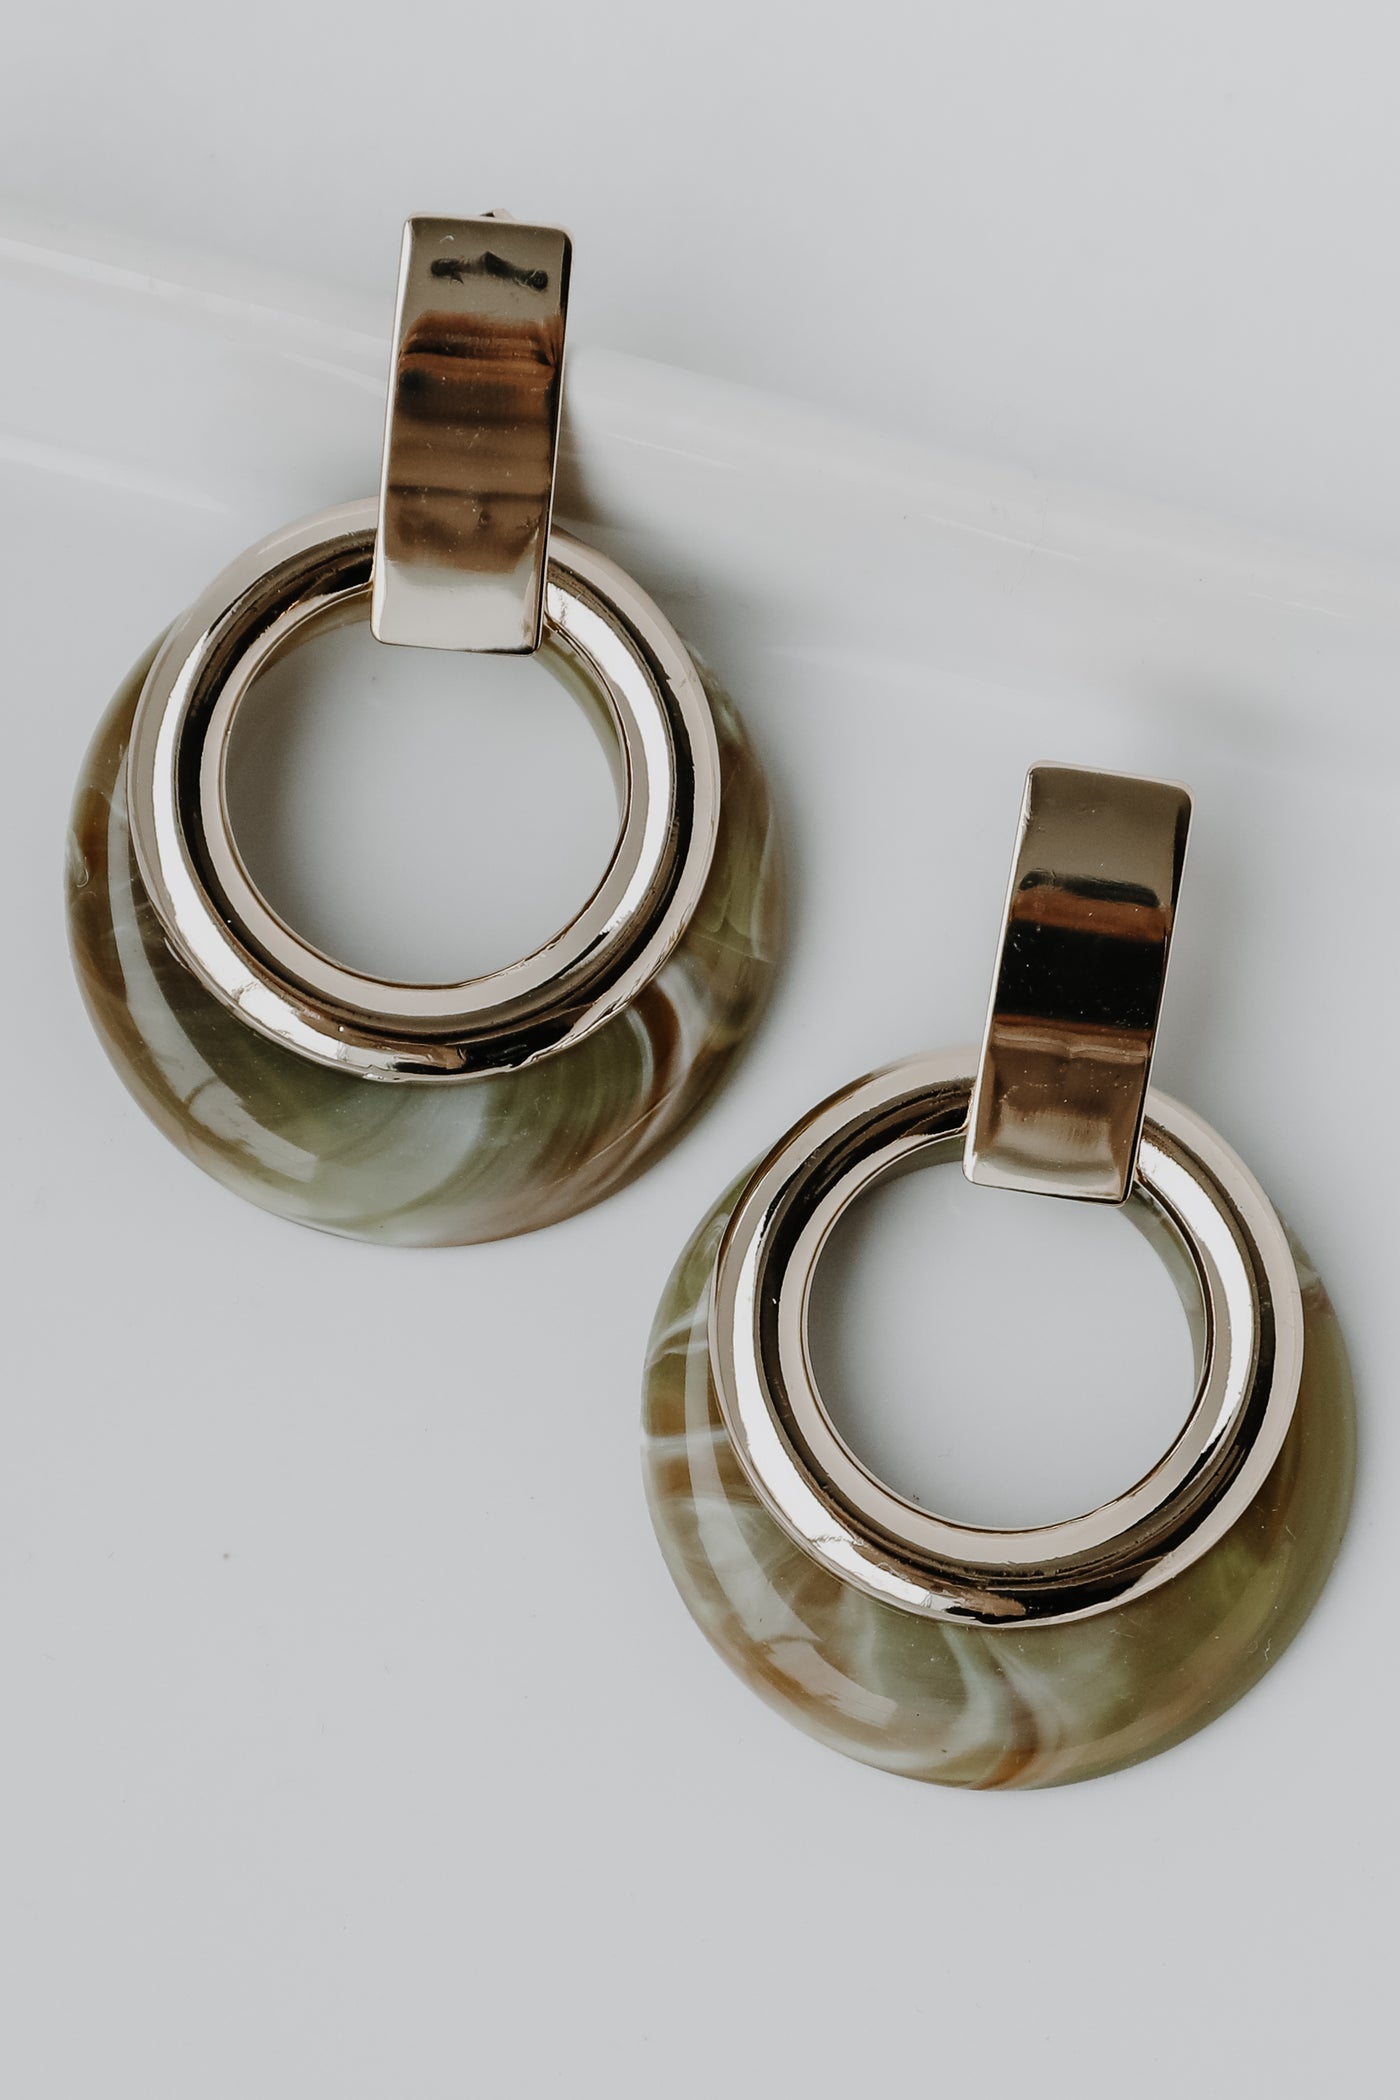 Acrylic Statement Earrings in olive flat lay